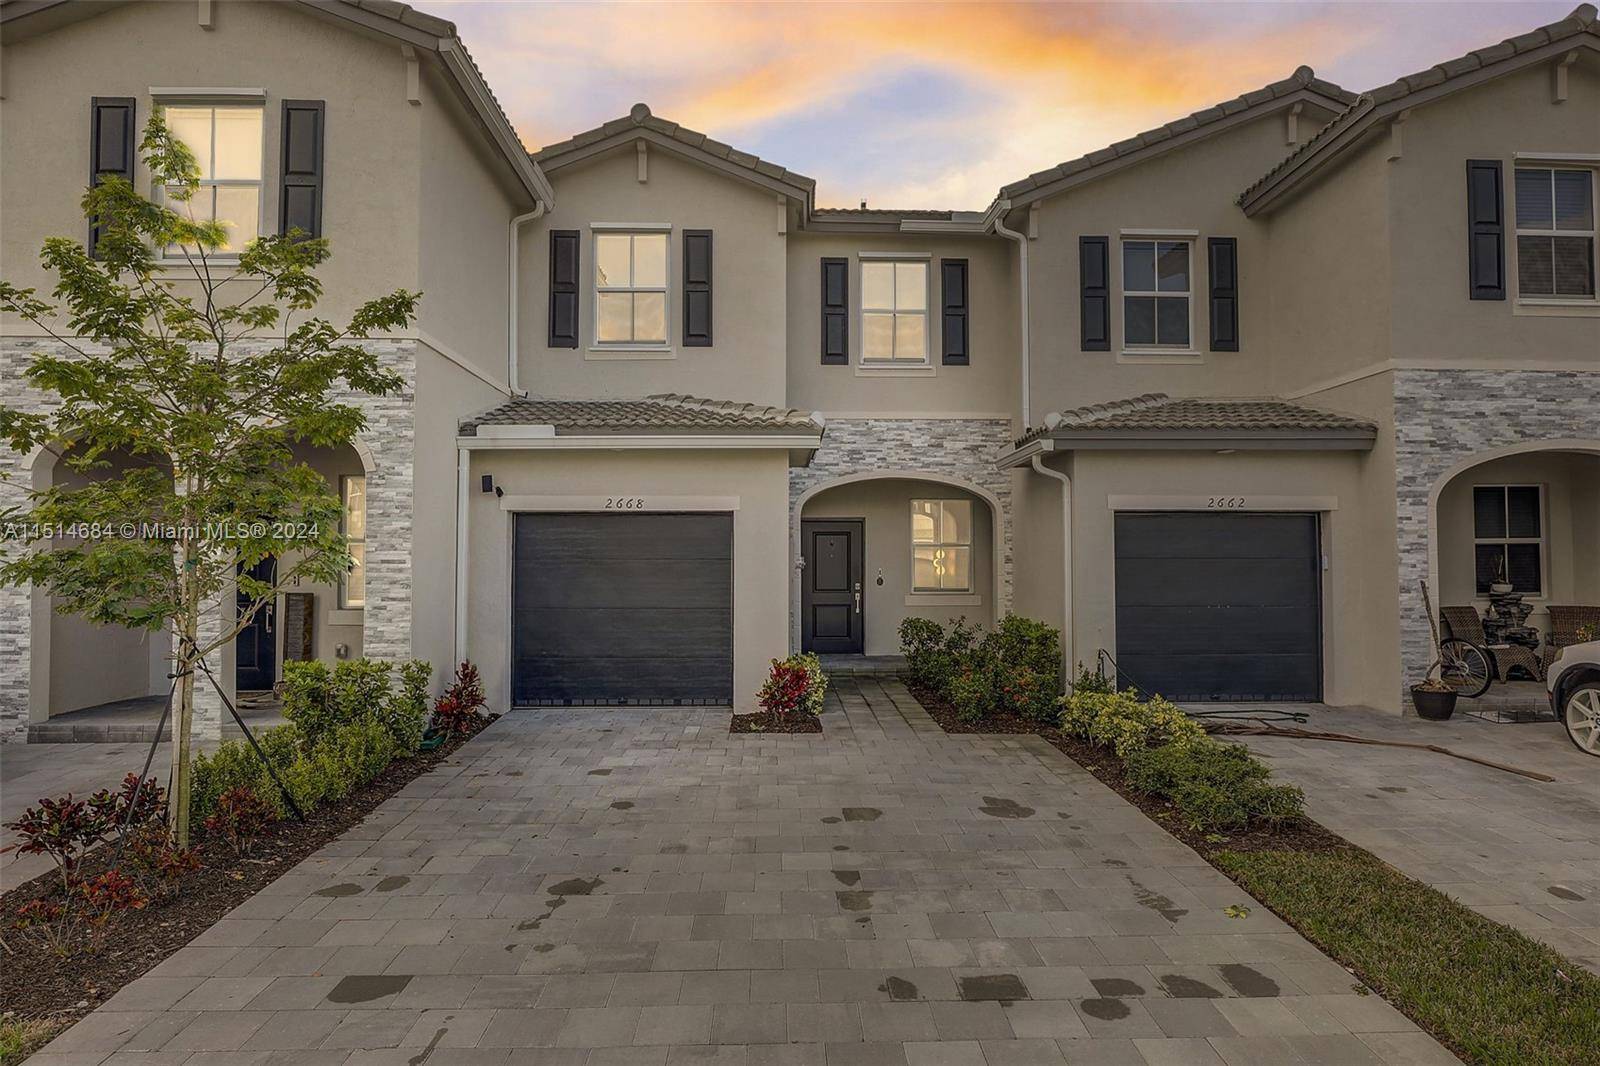 Stunning new construction townhome features 3 bedrooms and 2.